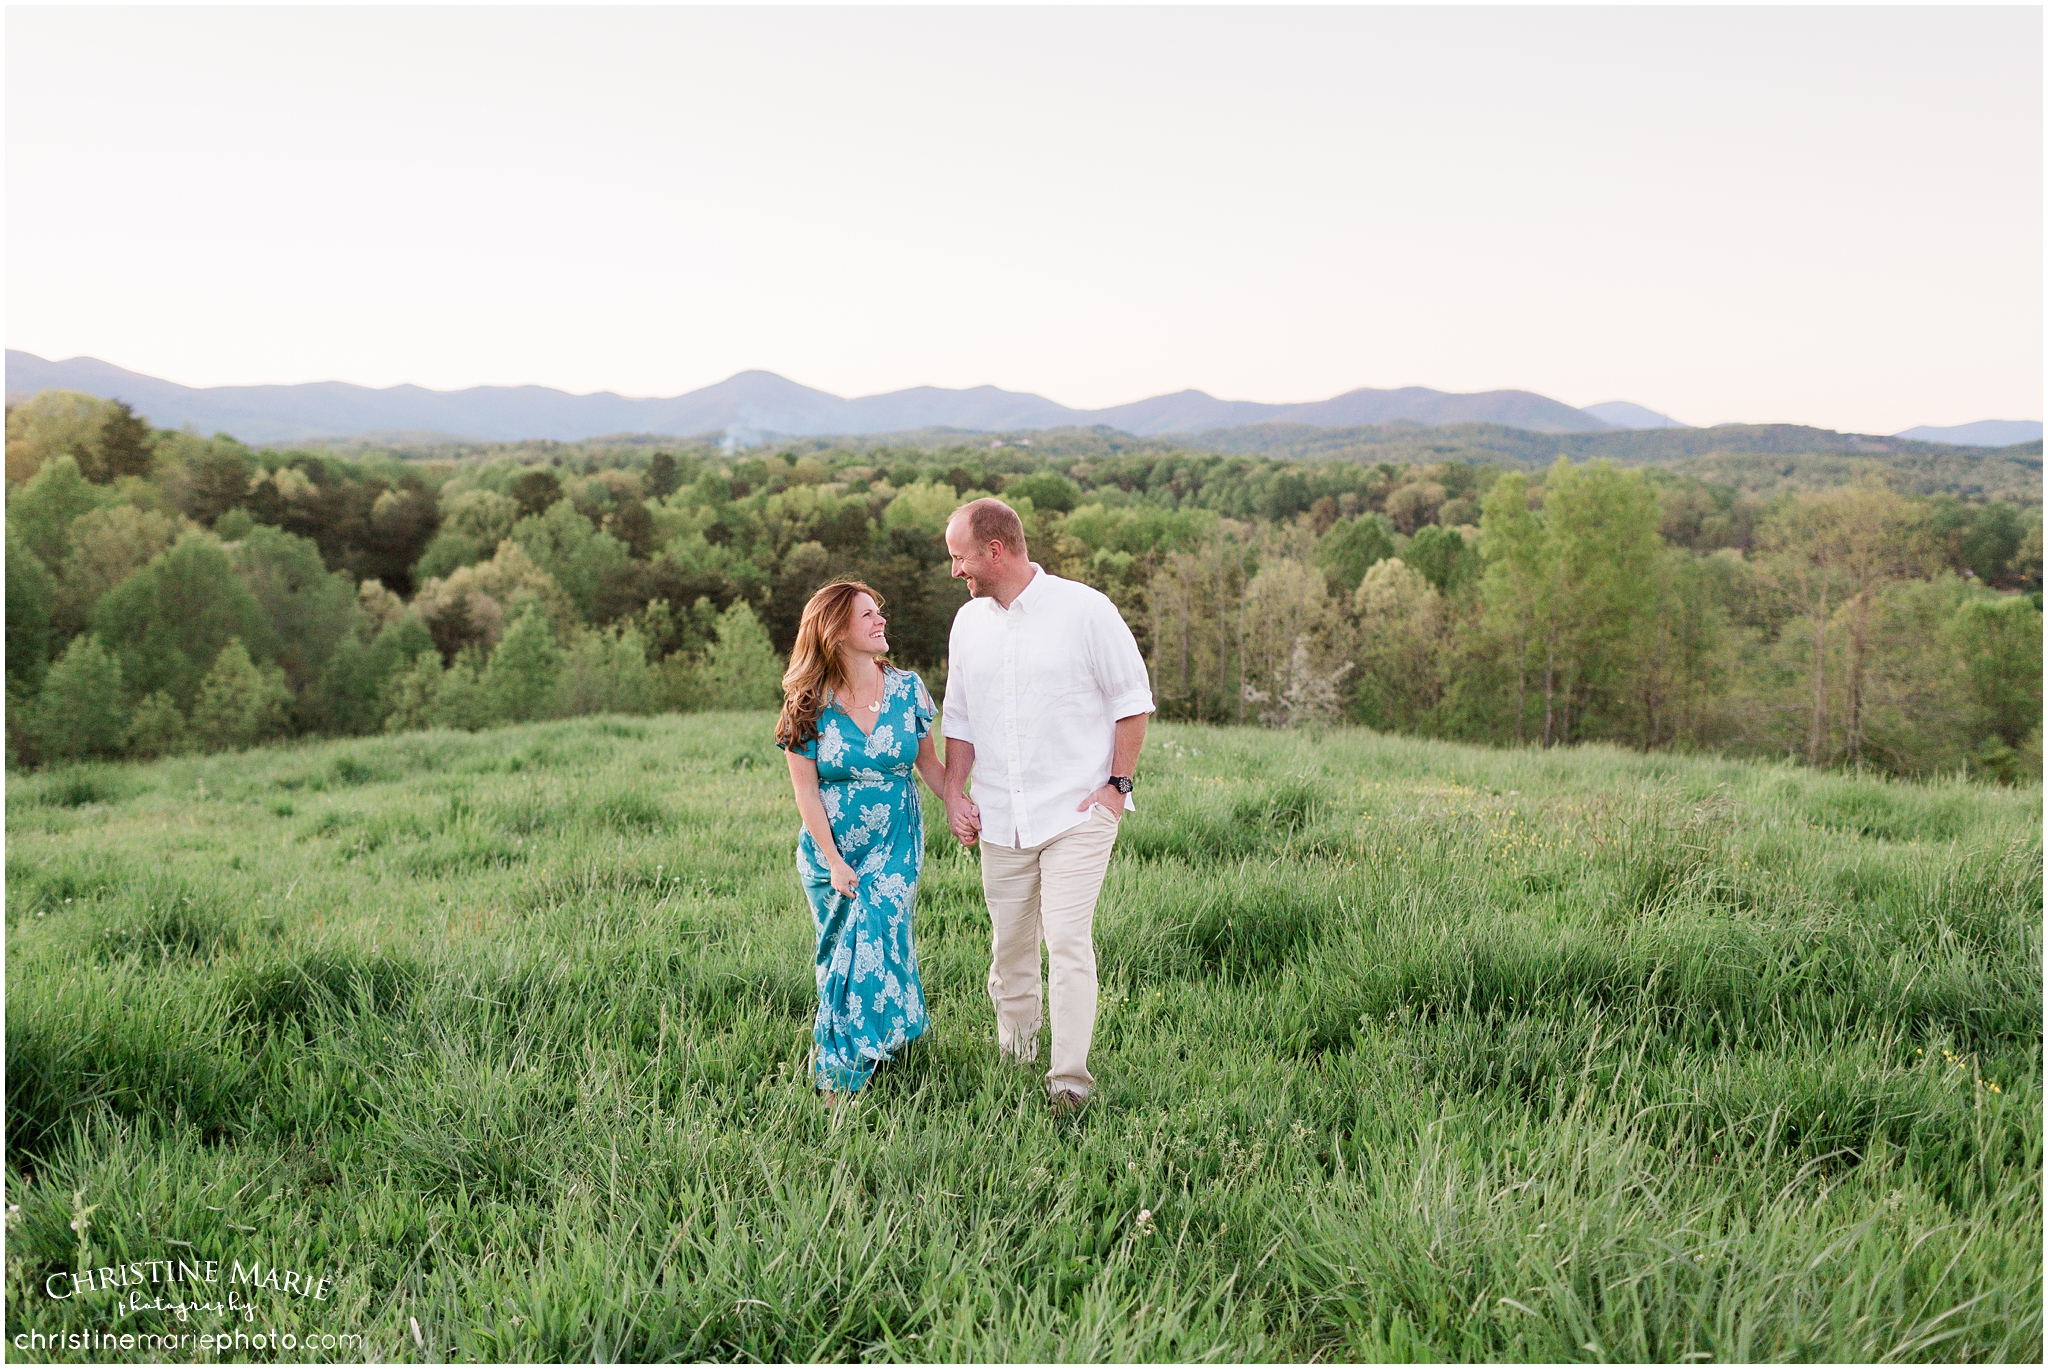 natural family photos, christine marie photography